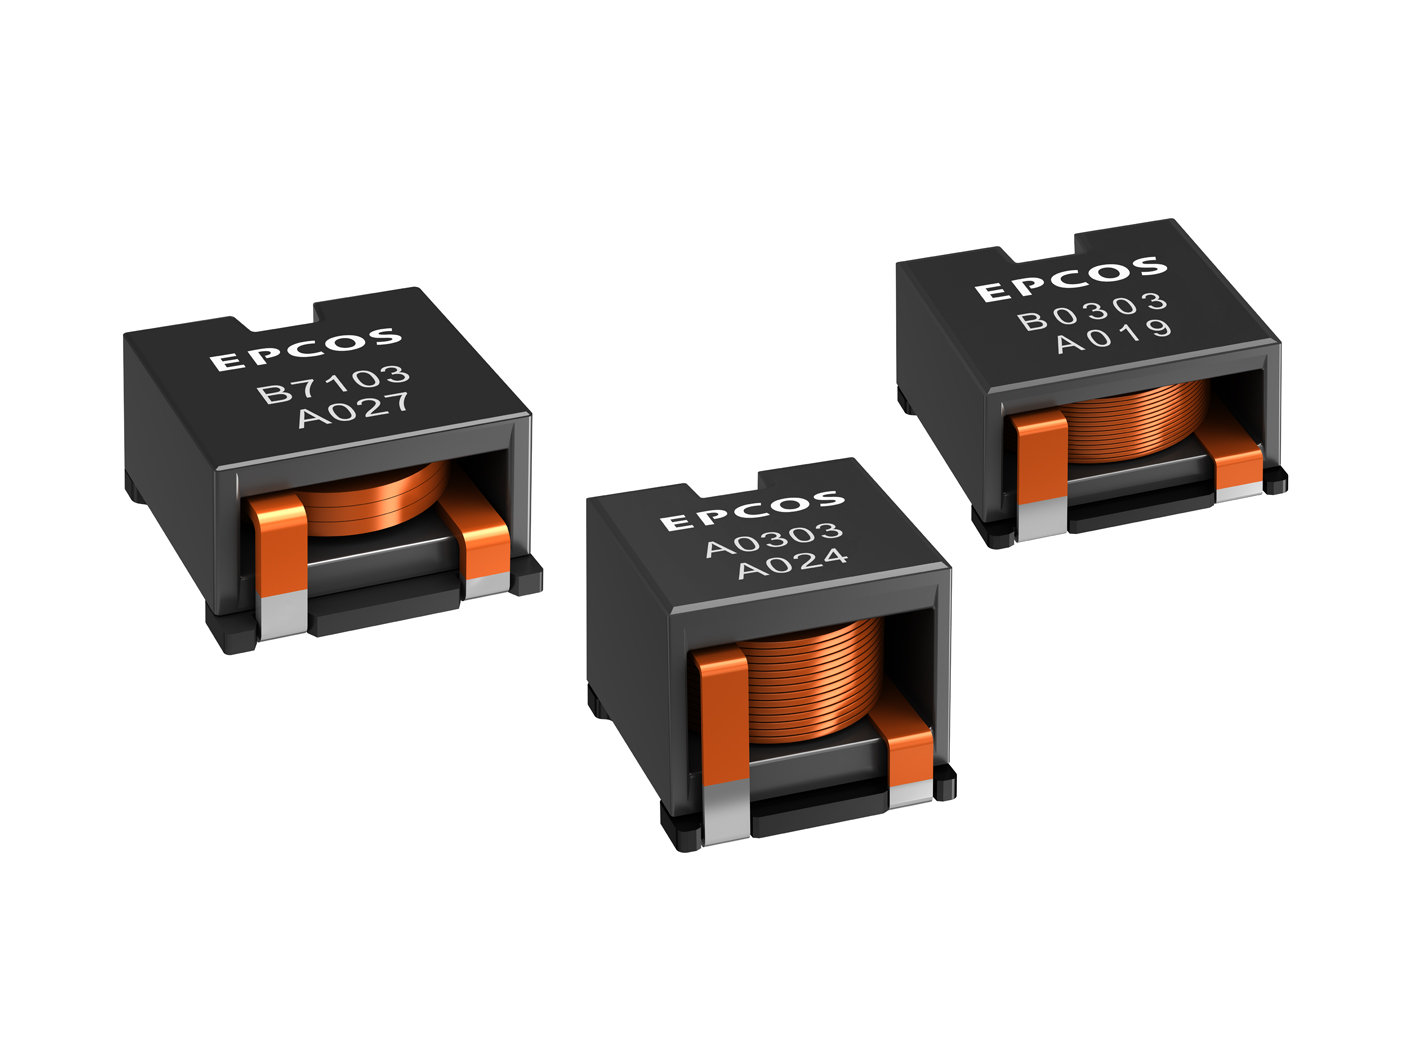 TDK Extends its Range of Compact SMT High-Current Chokes